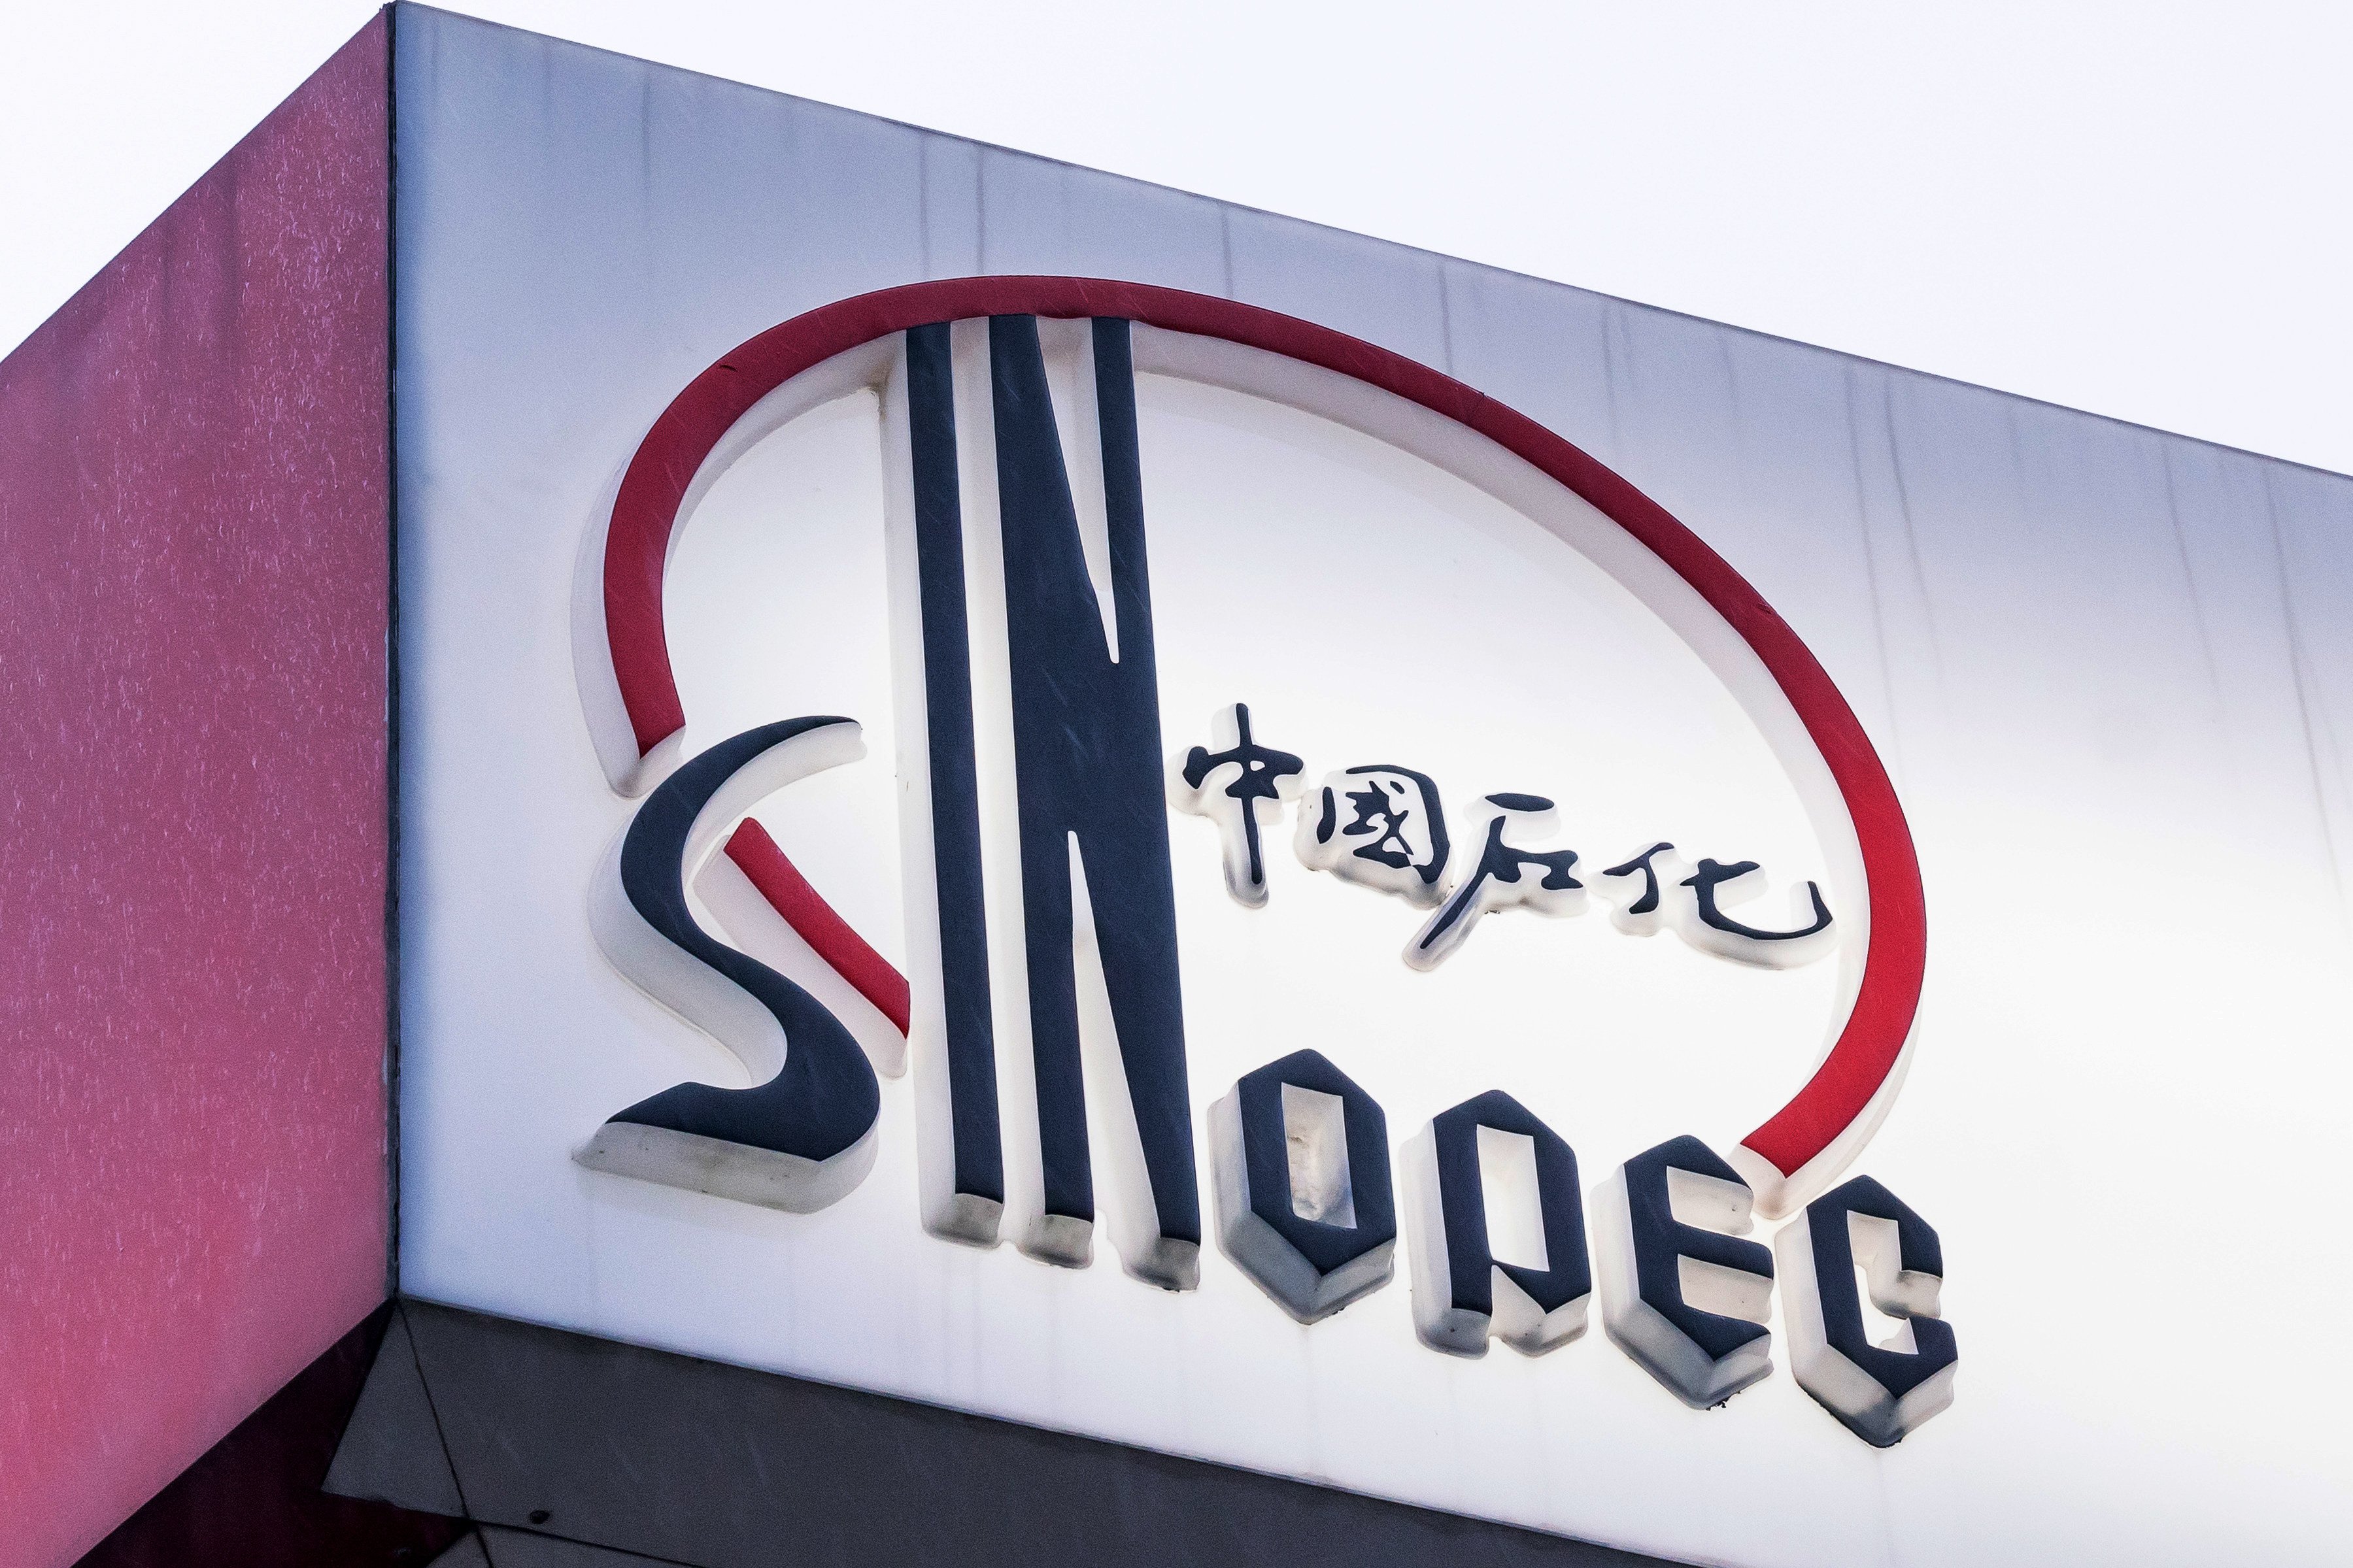 Signage sits atop a China Petroleum & Chemical (Sinopec) gas station in Hong Kong on March 23, 2019. Photo: Bloomberg